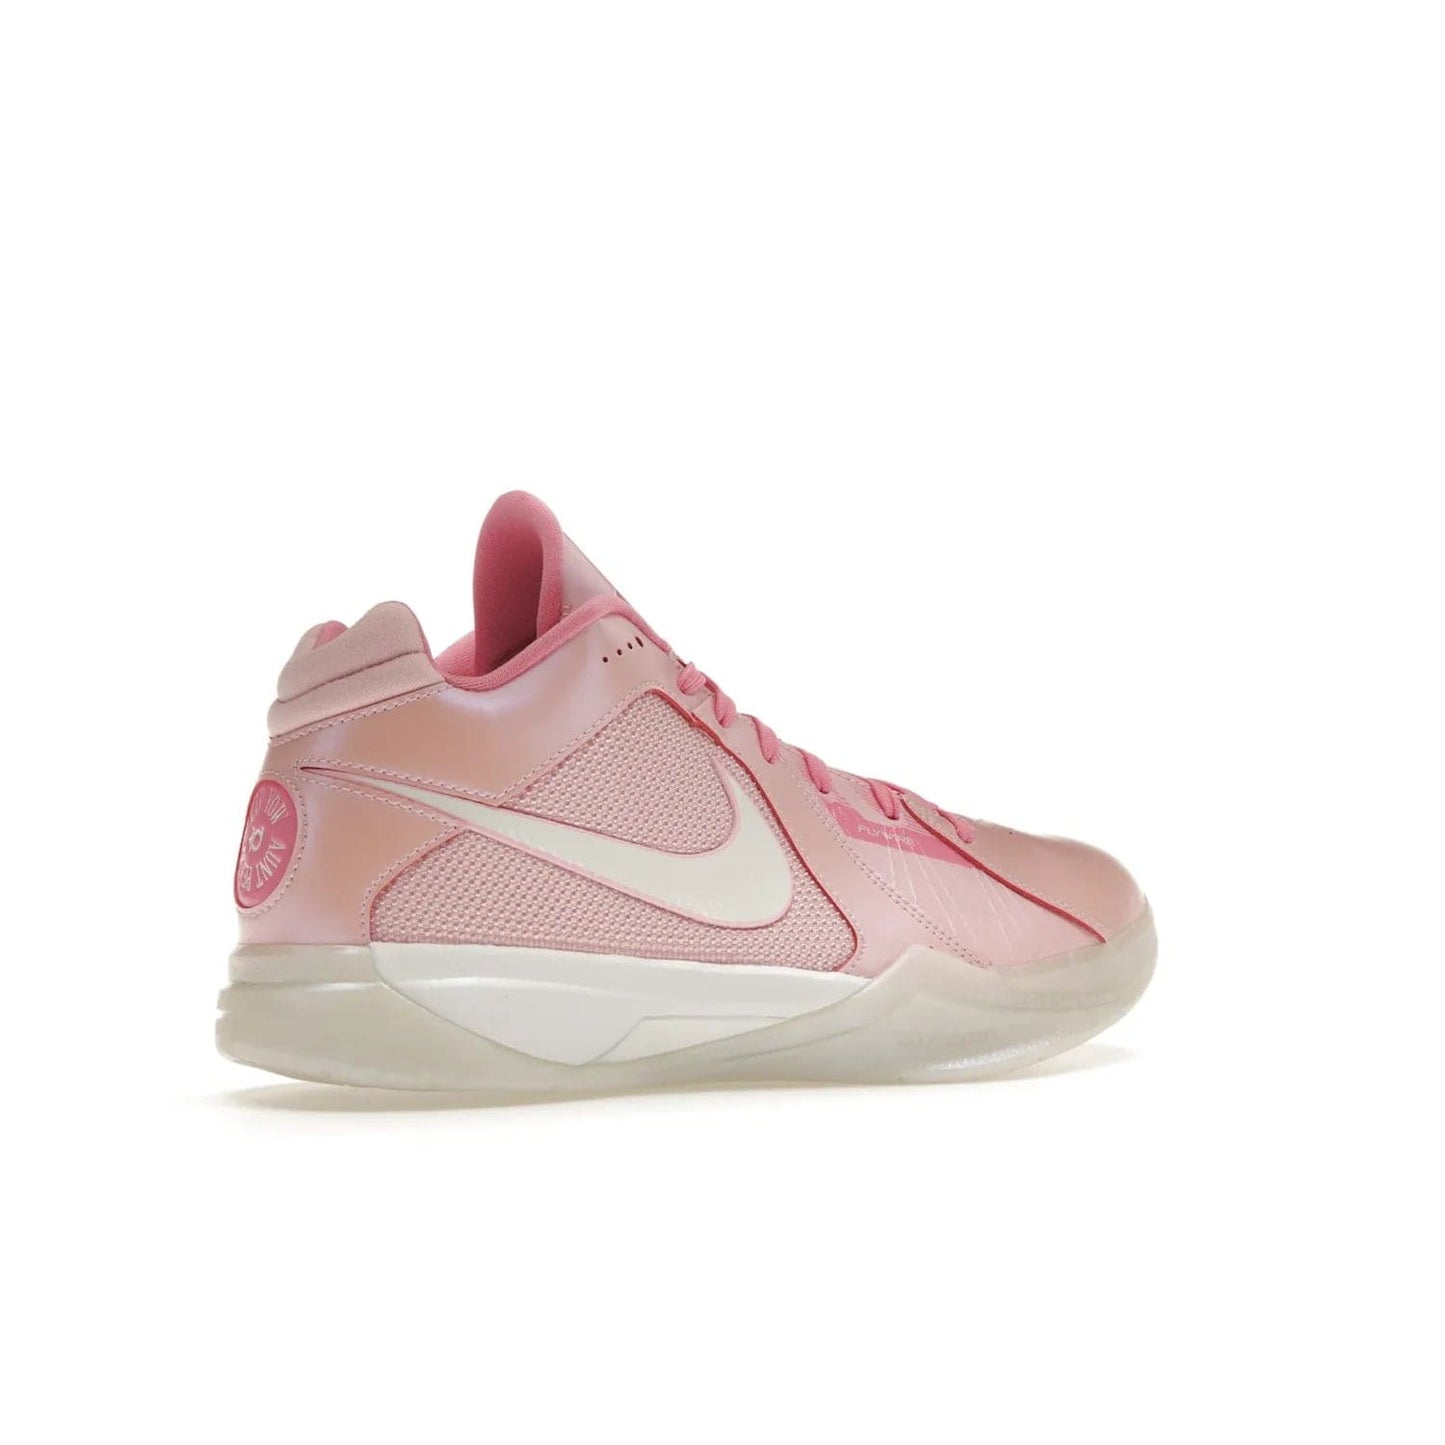 Nike KD 3 Aunt Pearl - Image 34 - Only at www.BallersClubKickz.com - Introducing the Nike KD 3 Aunt Pearl. Featuring a bold Medium Soft Pink, White, & Lotus Pink colorway. Get ready to stand out this October 15th.